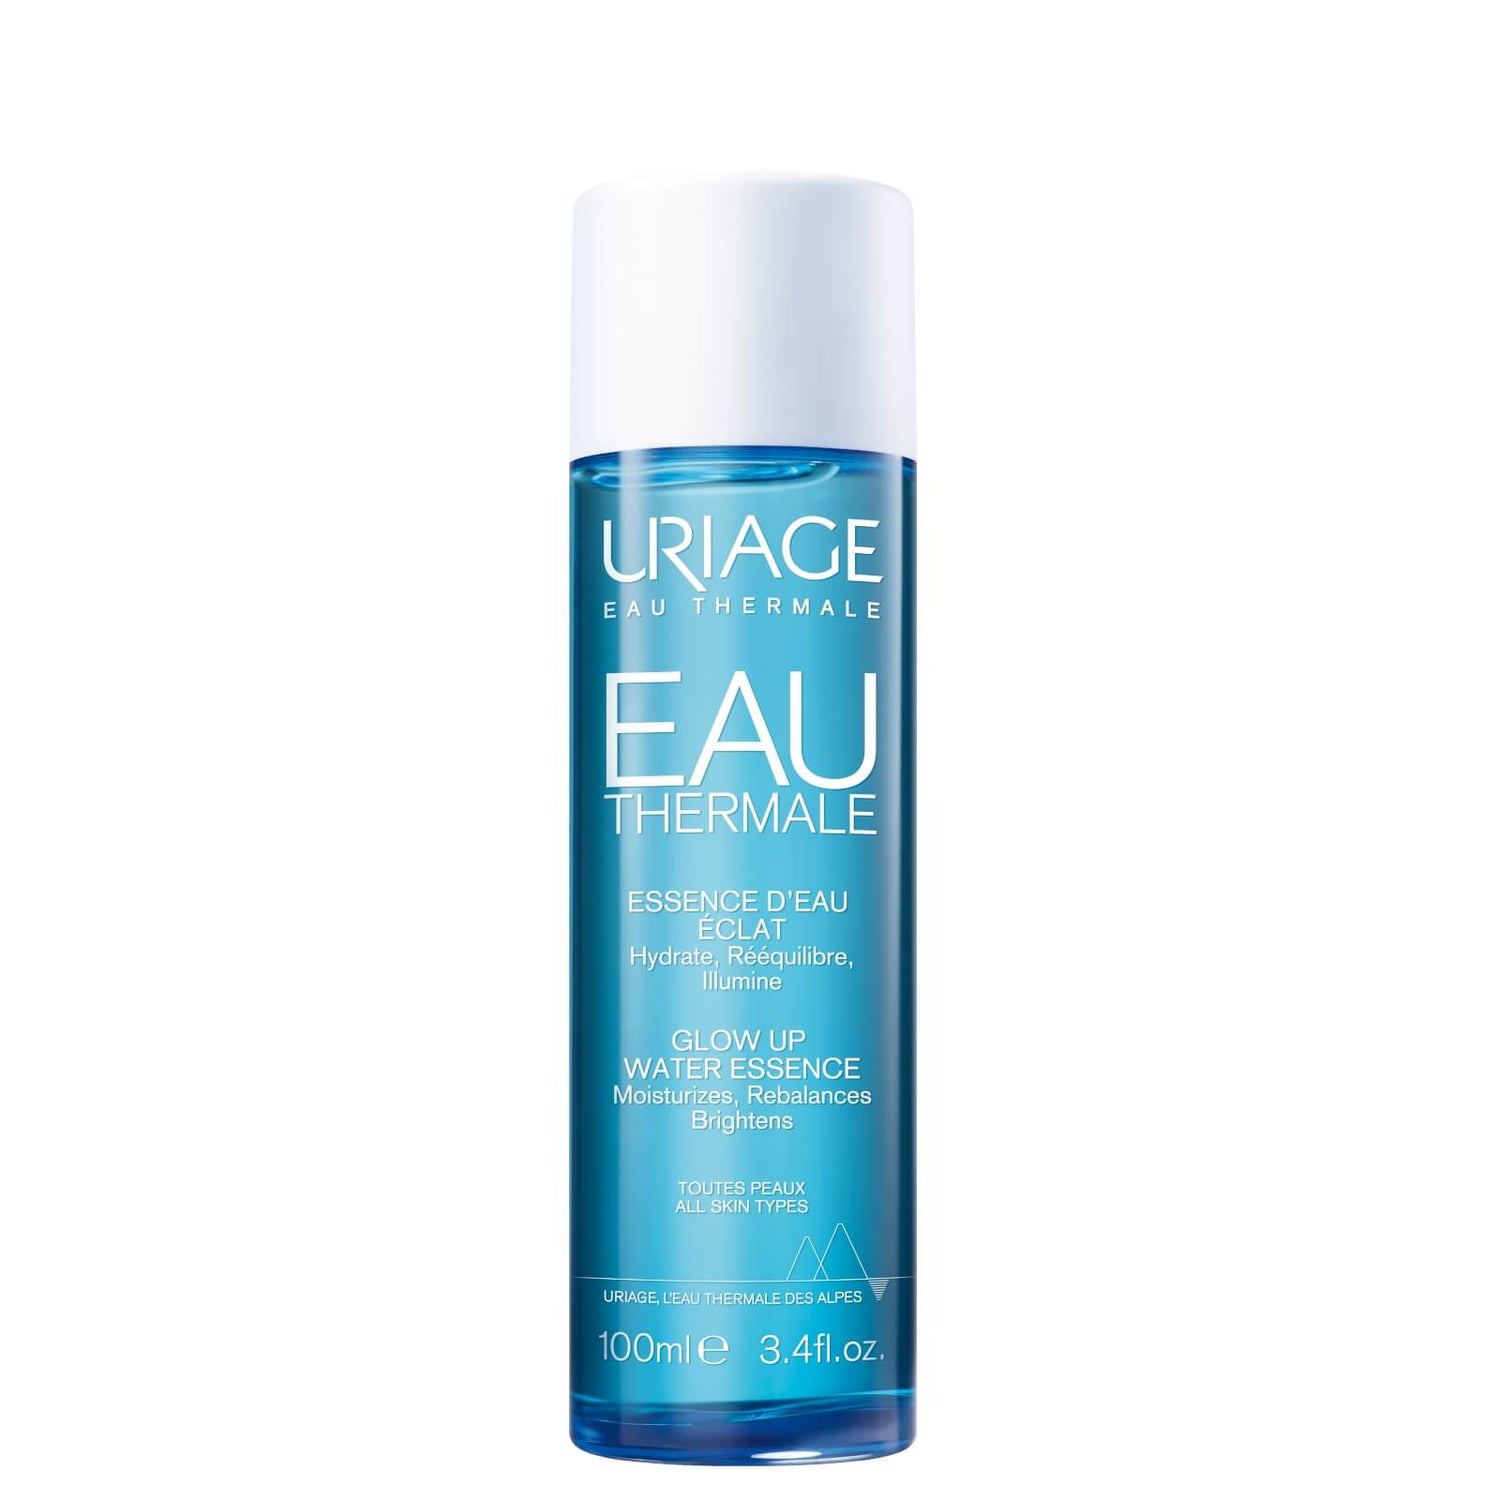 Uriage Eau Thermale Glow Up Water Essence 100ml